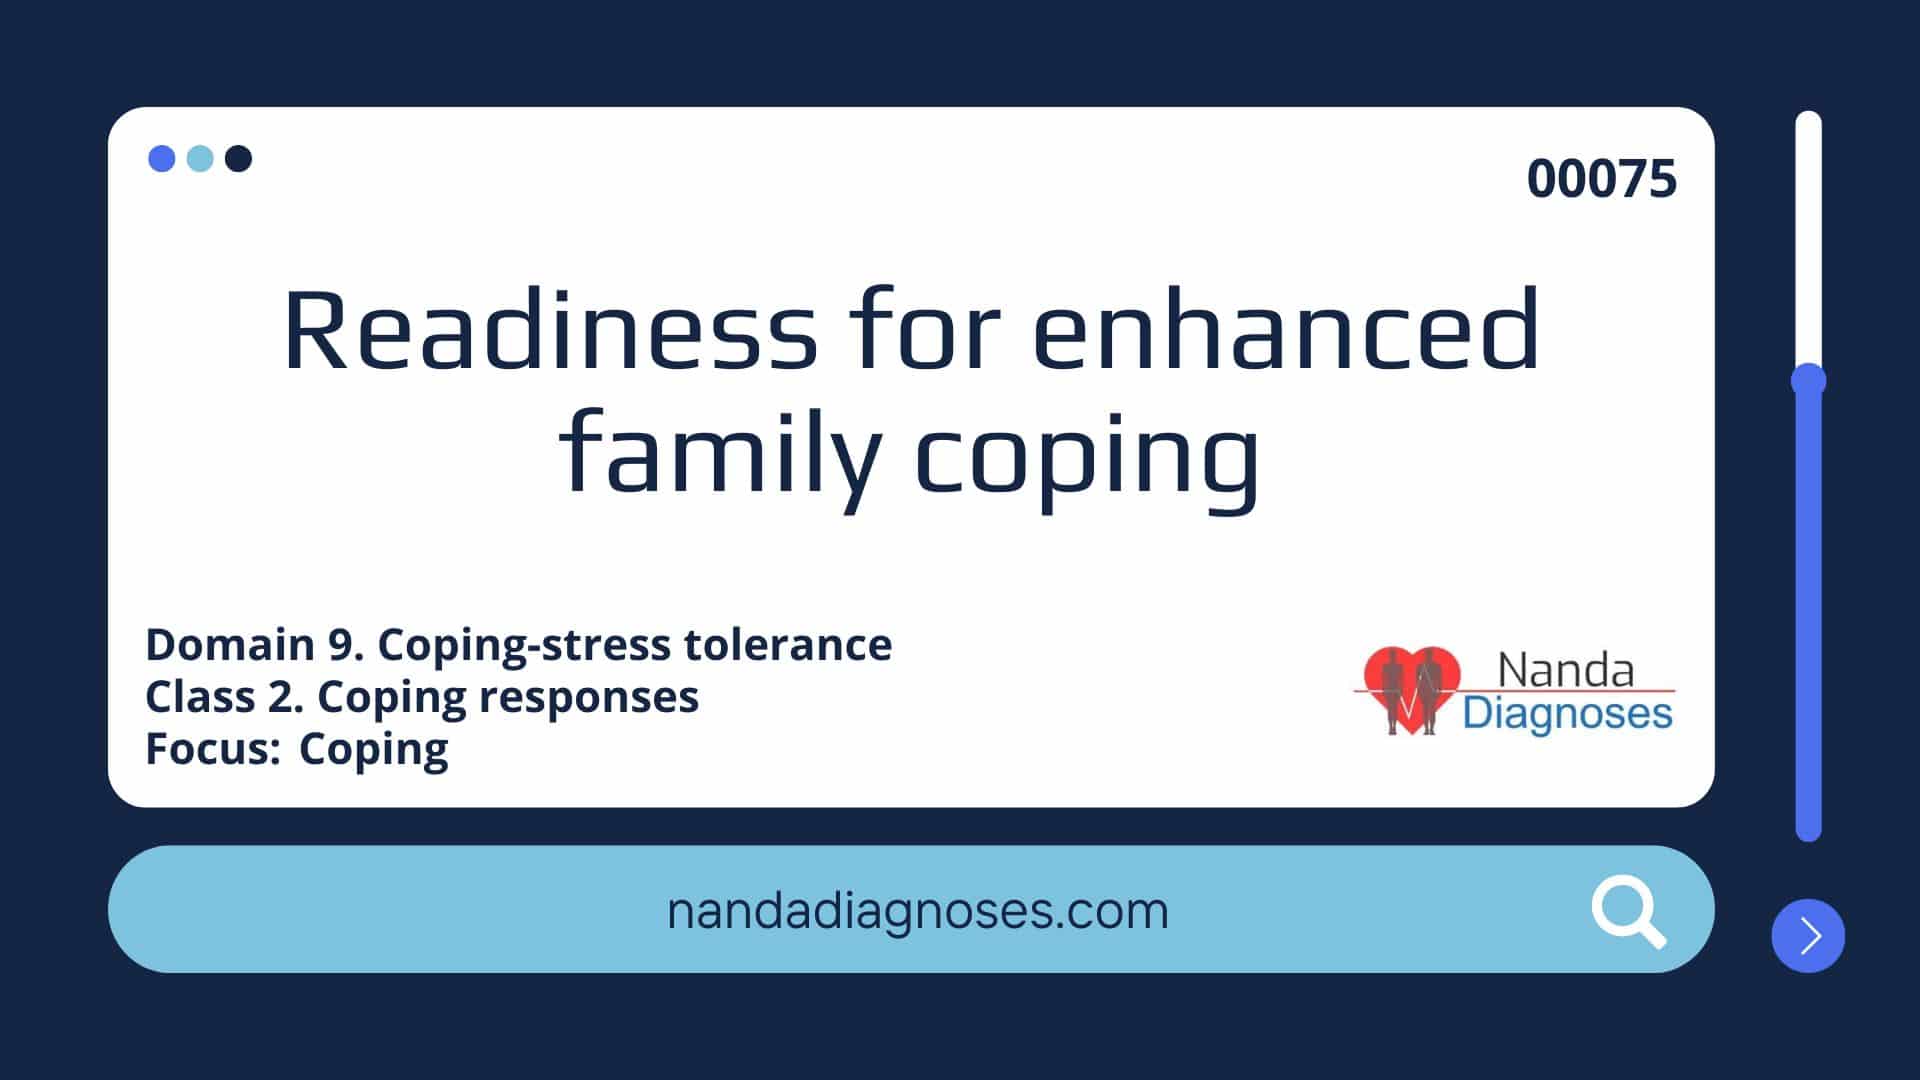 Nursing diagnosis Readiness for enhanced family coping